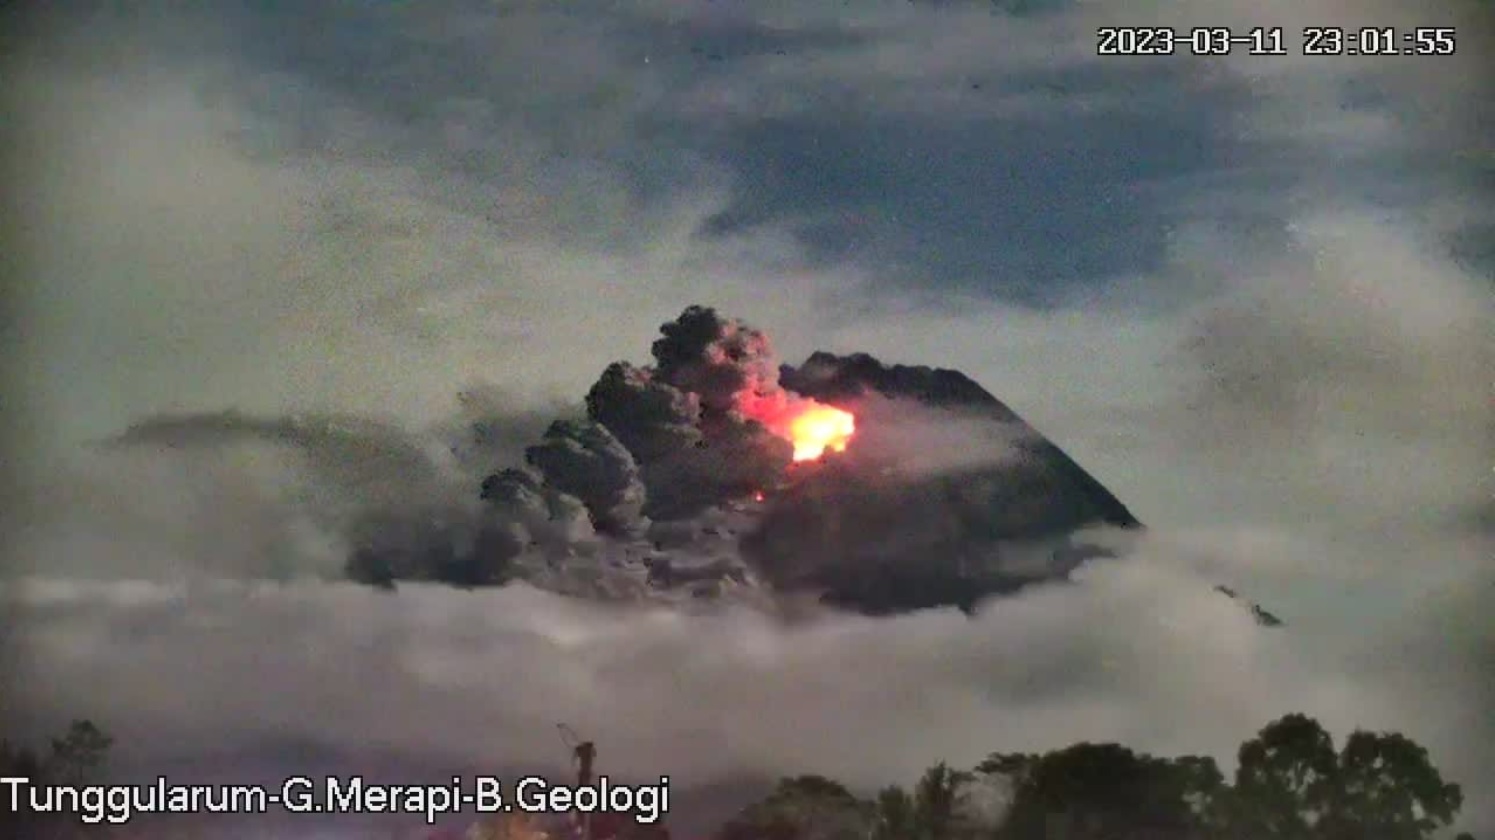 Large pyroclastic flow and glowing lava dome tonight at Merapi volcano (image: PVMBG)